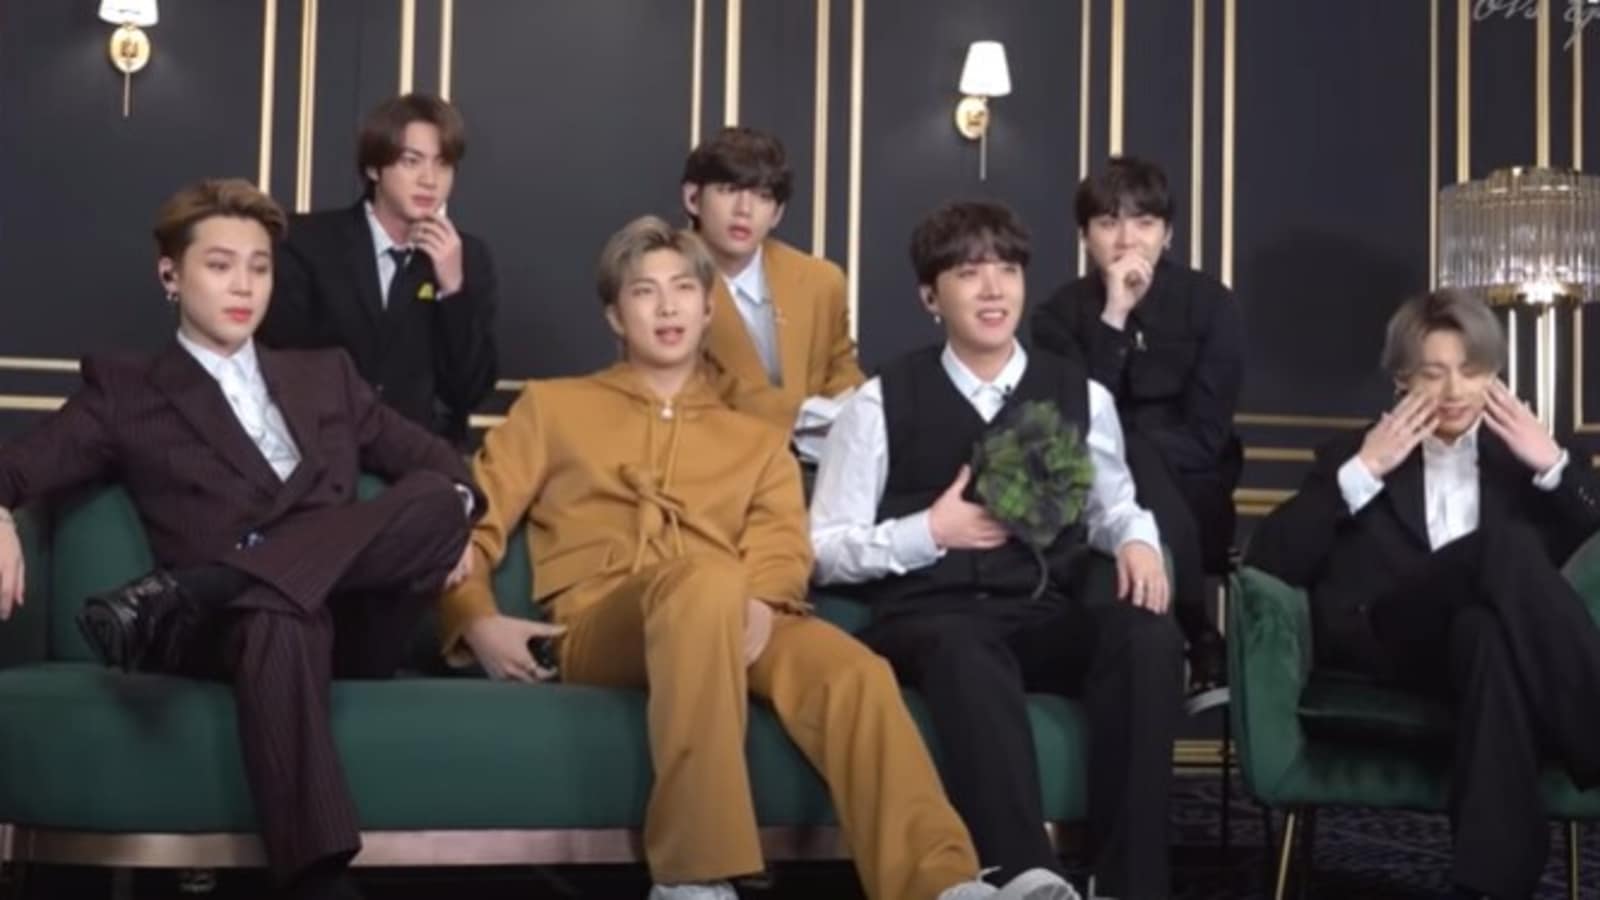 BTS RM was worried for ARMY after Kpop group lost at Grammys 2021